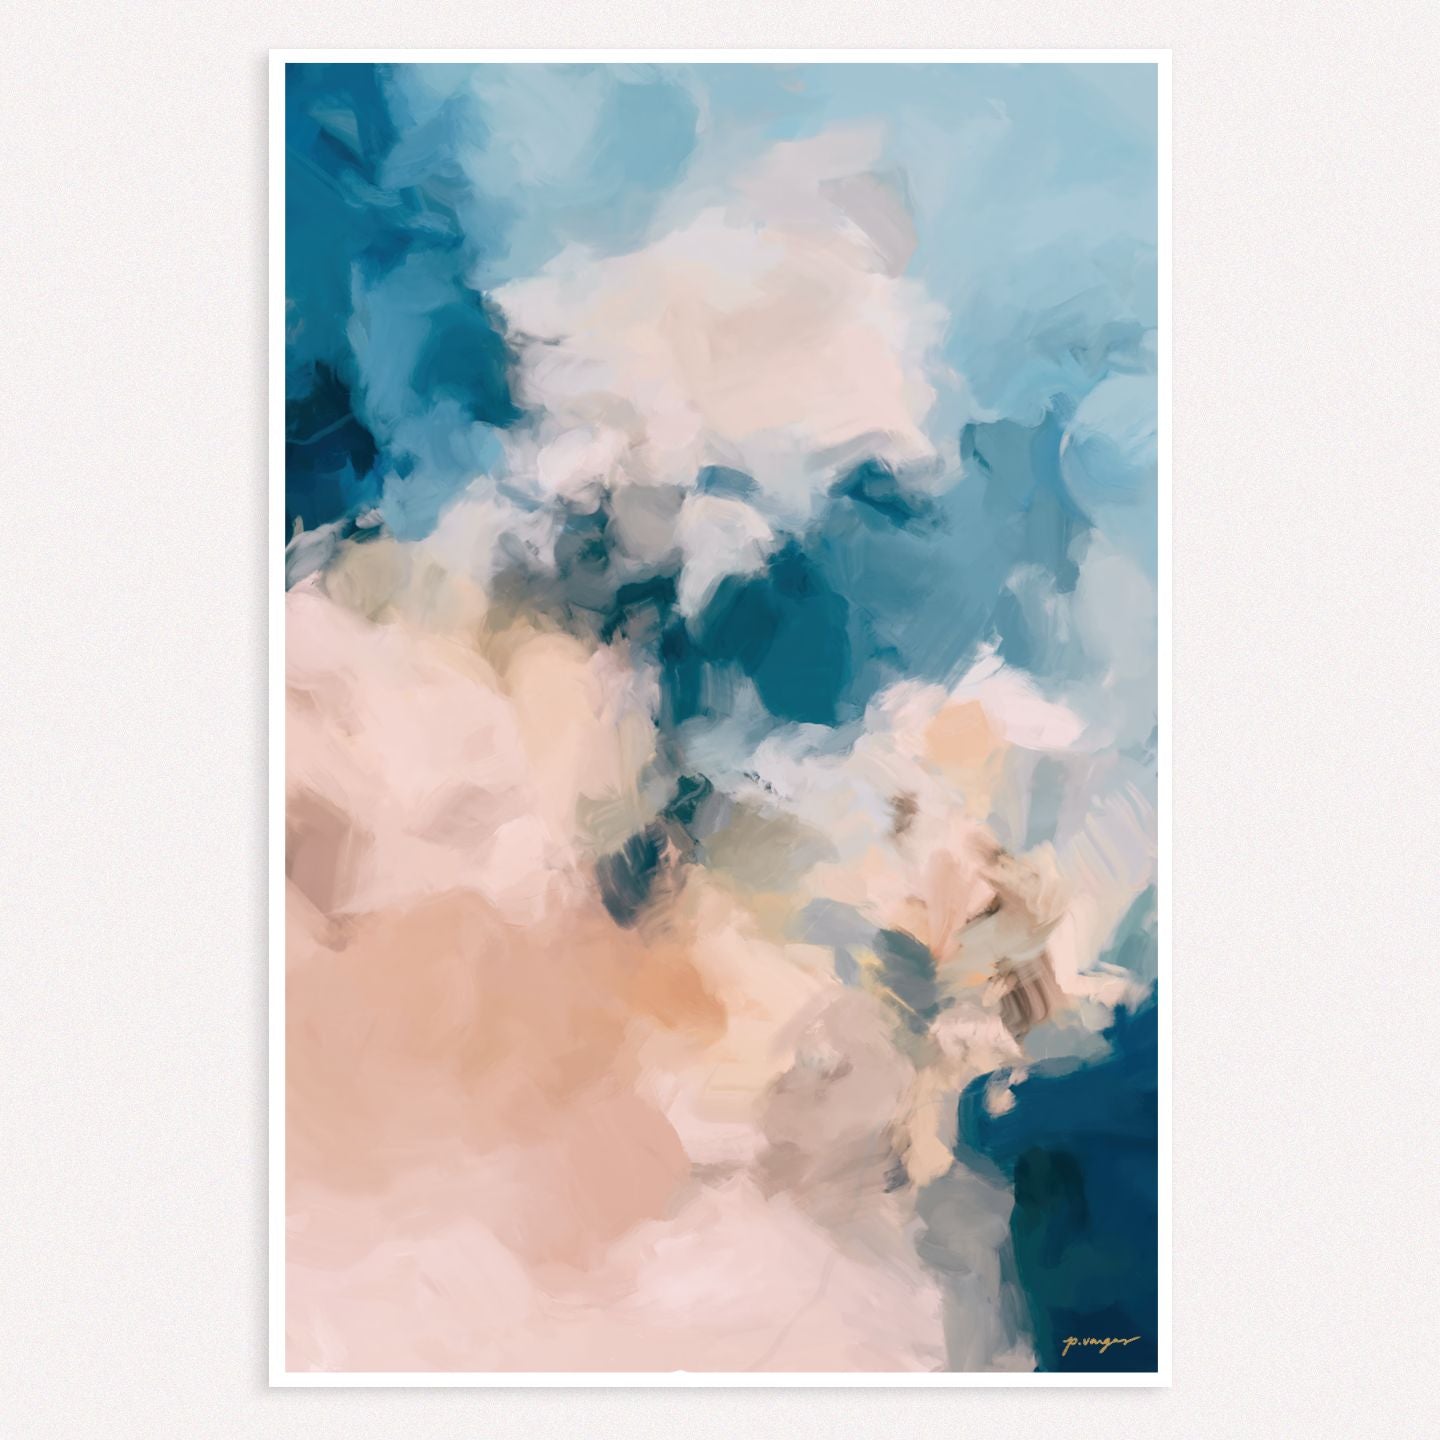 Coastal, blue and pink colorful abstract wall art print by Parima Studio